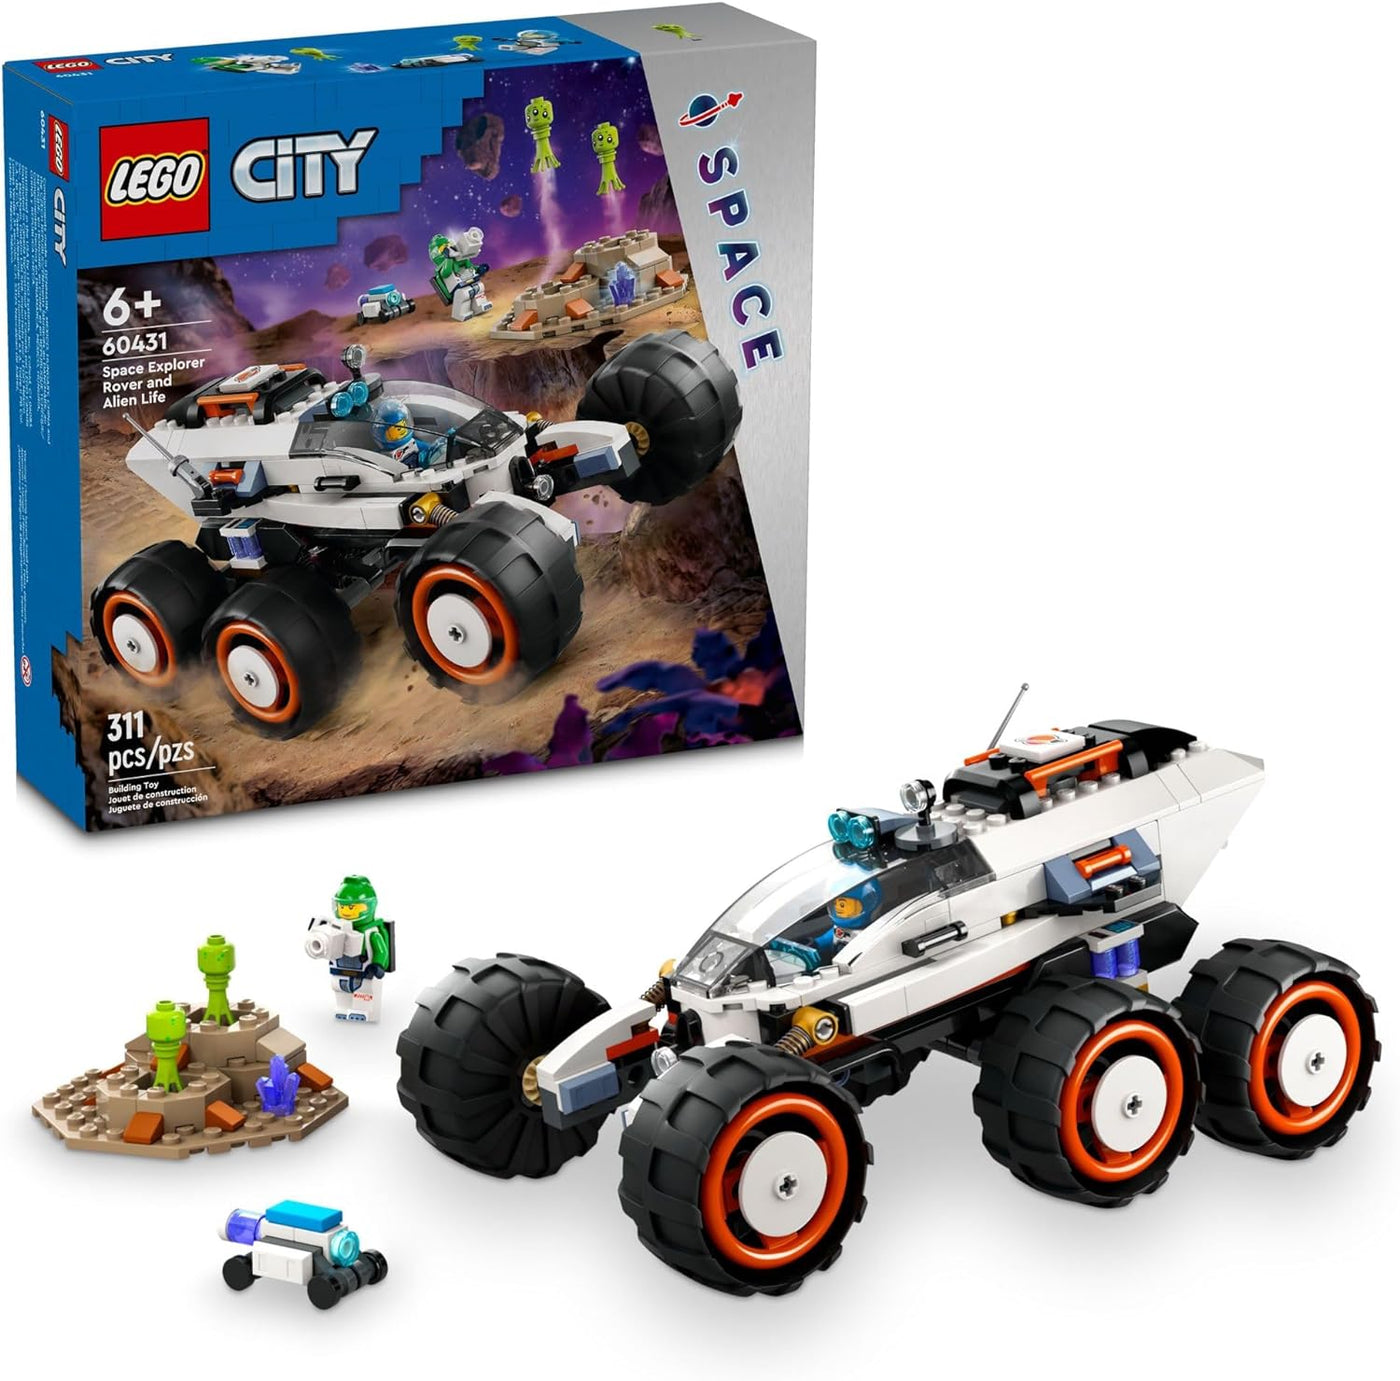 LEGO 60431 Space Explorer Rover and Alien Life